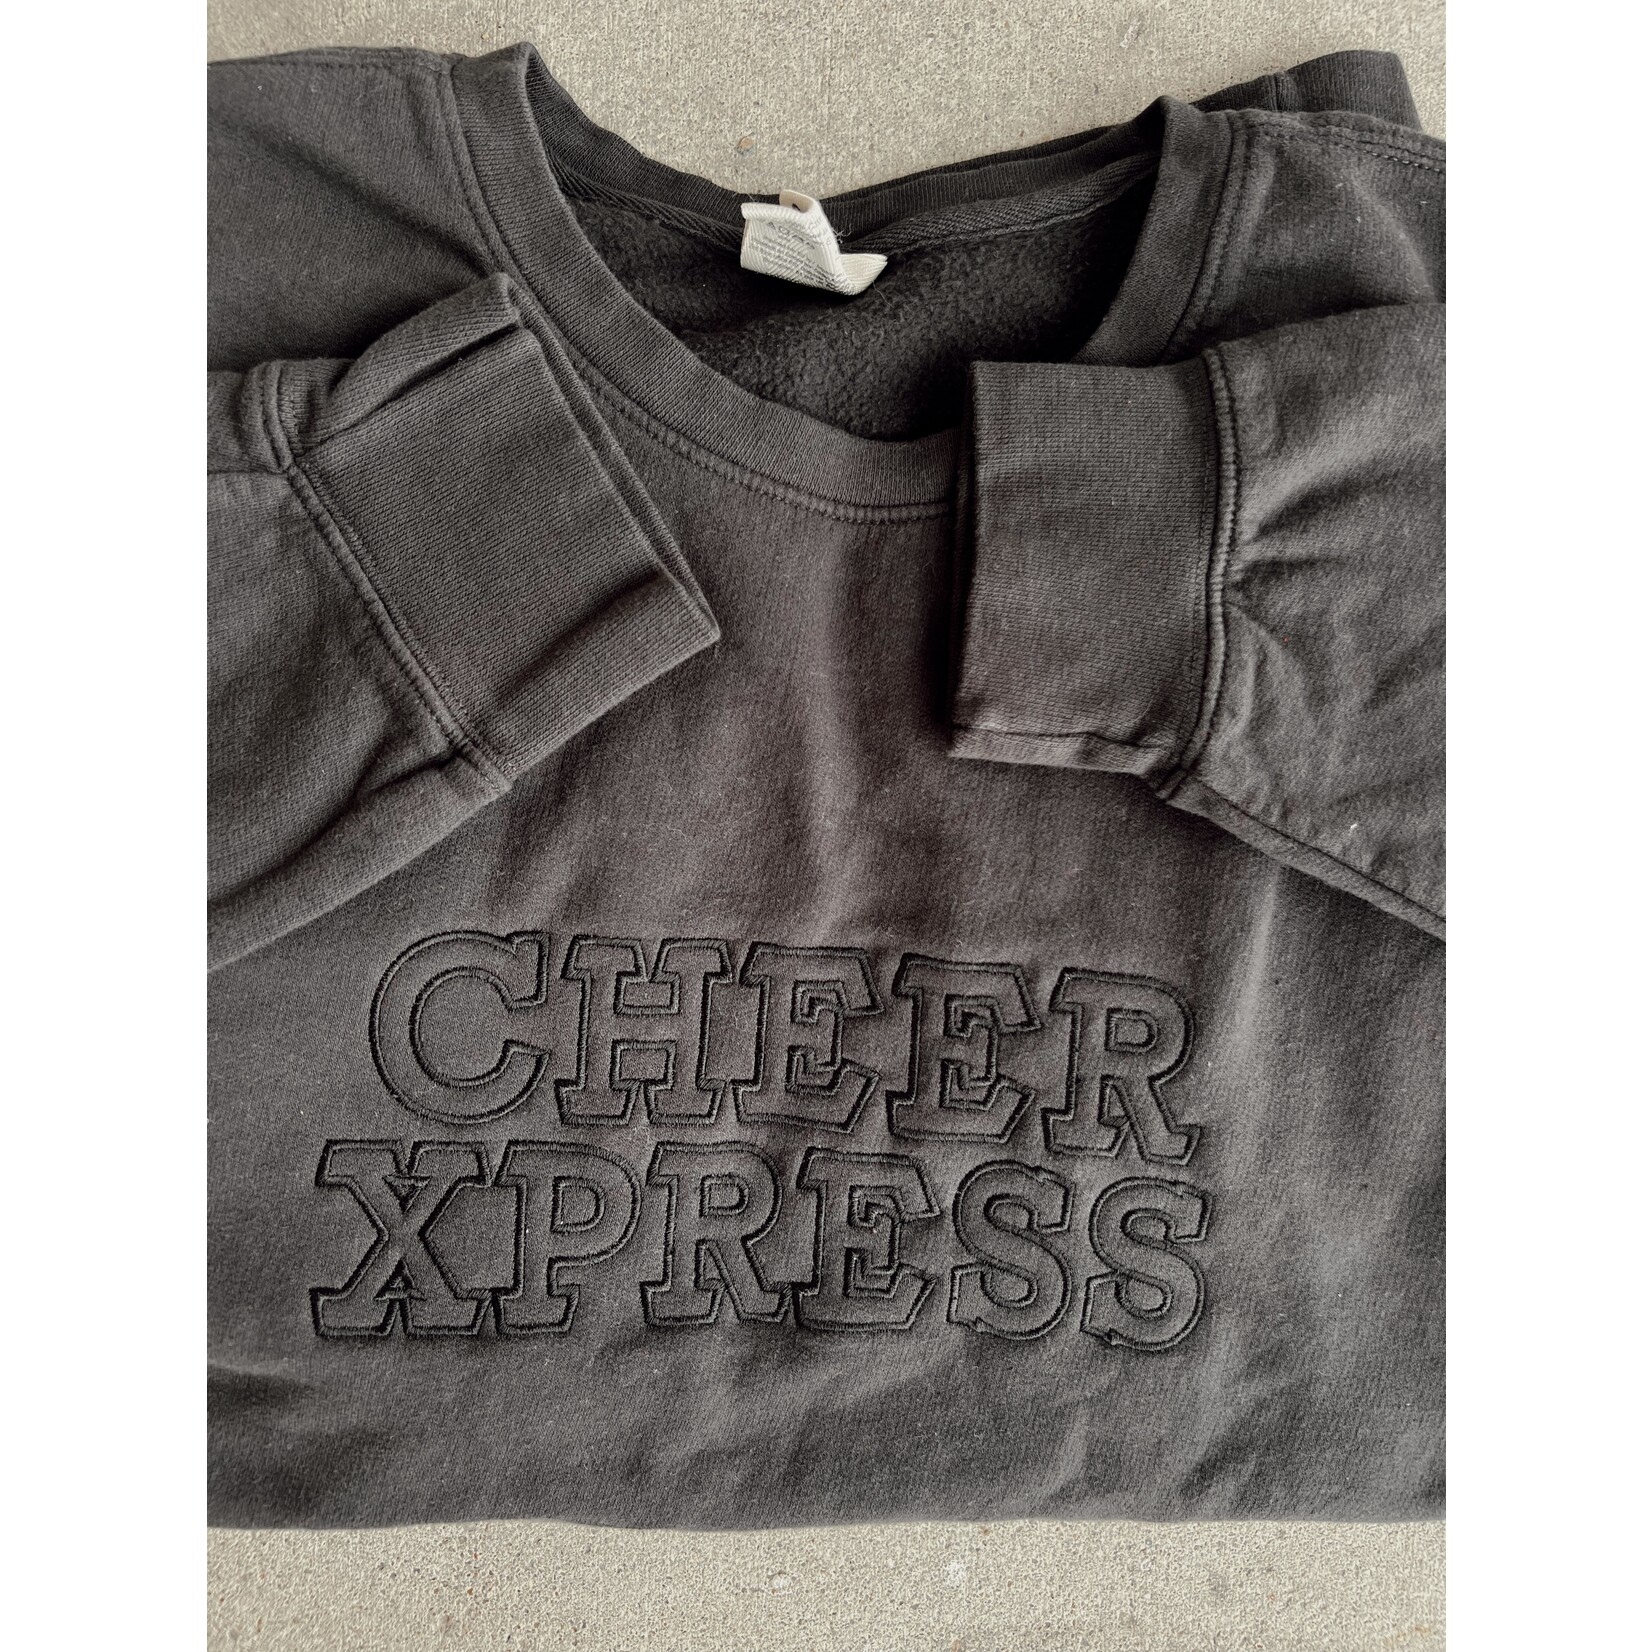 comfort colors Cheer Xpress Embroidered Crew